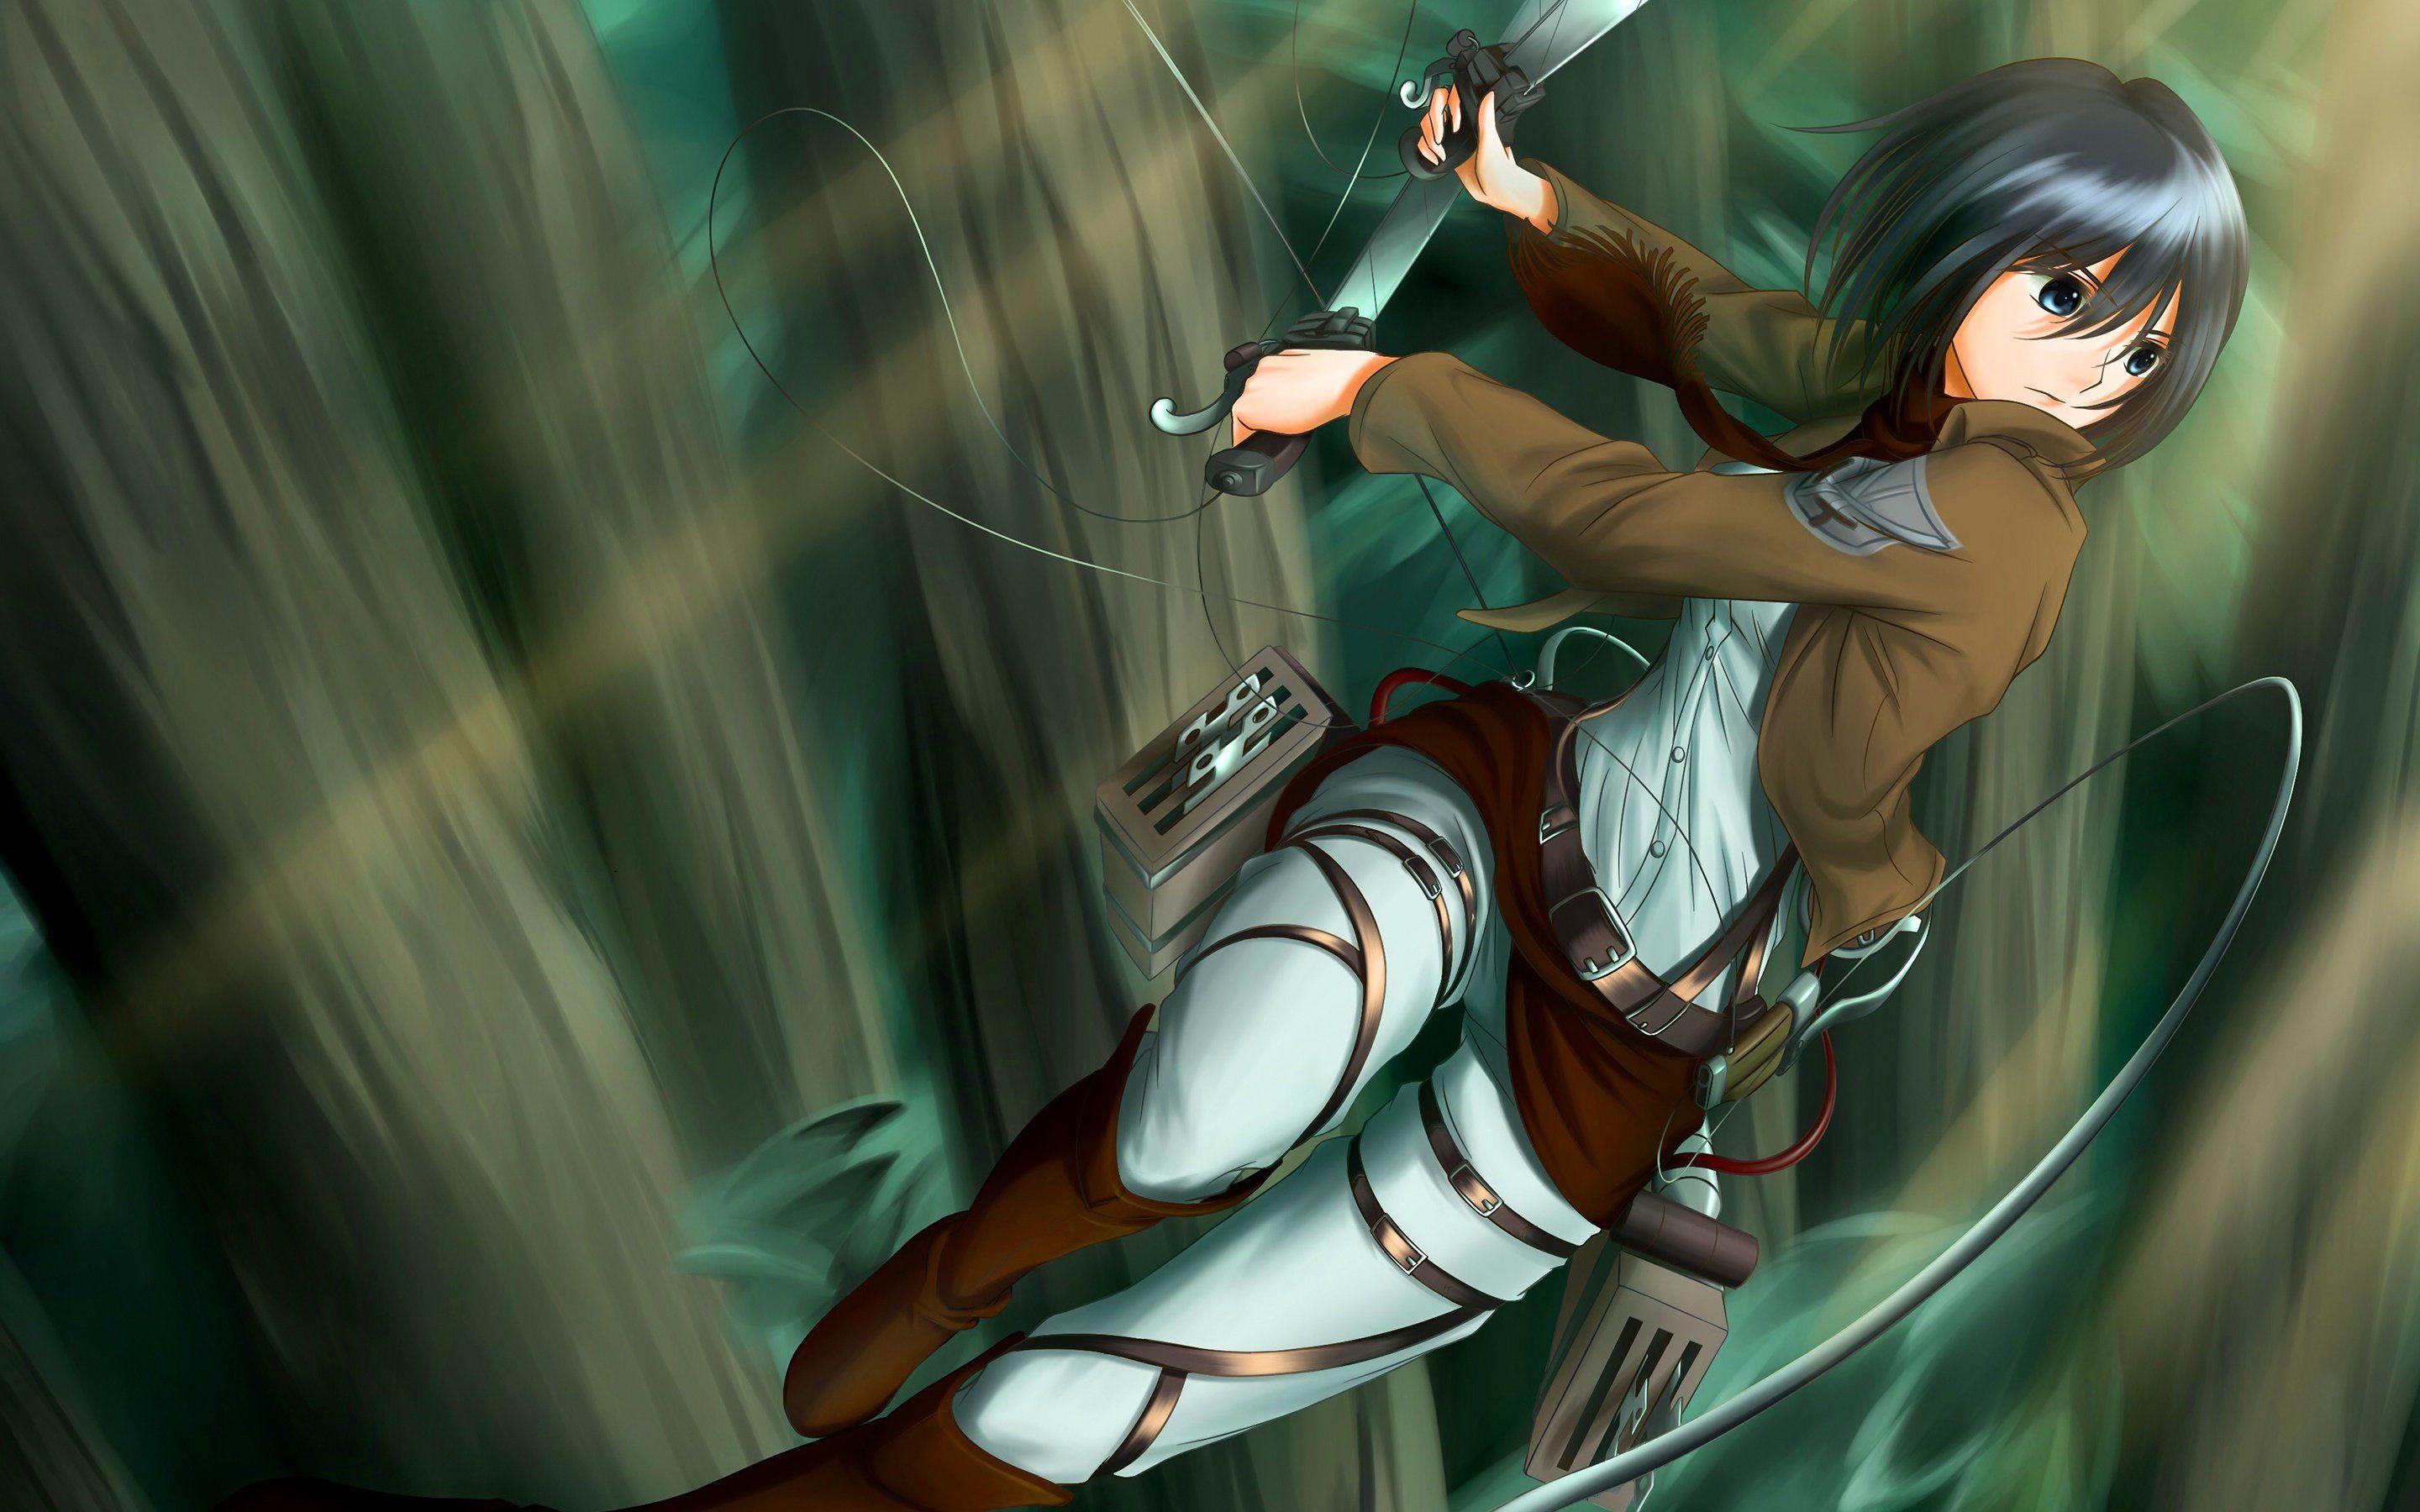 3. "Mikasa Ackerman" from the anime "Attack on Titan" - wide 7